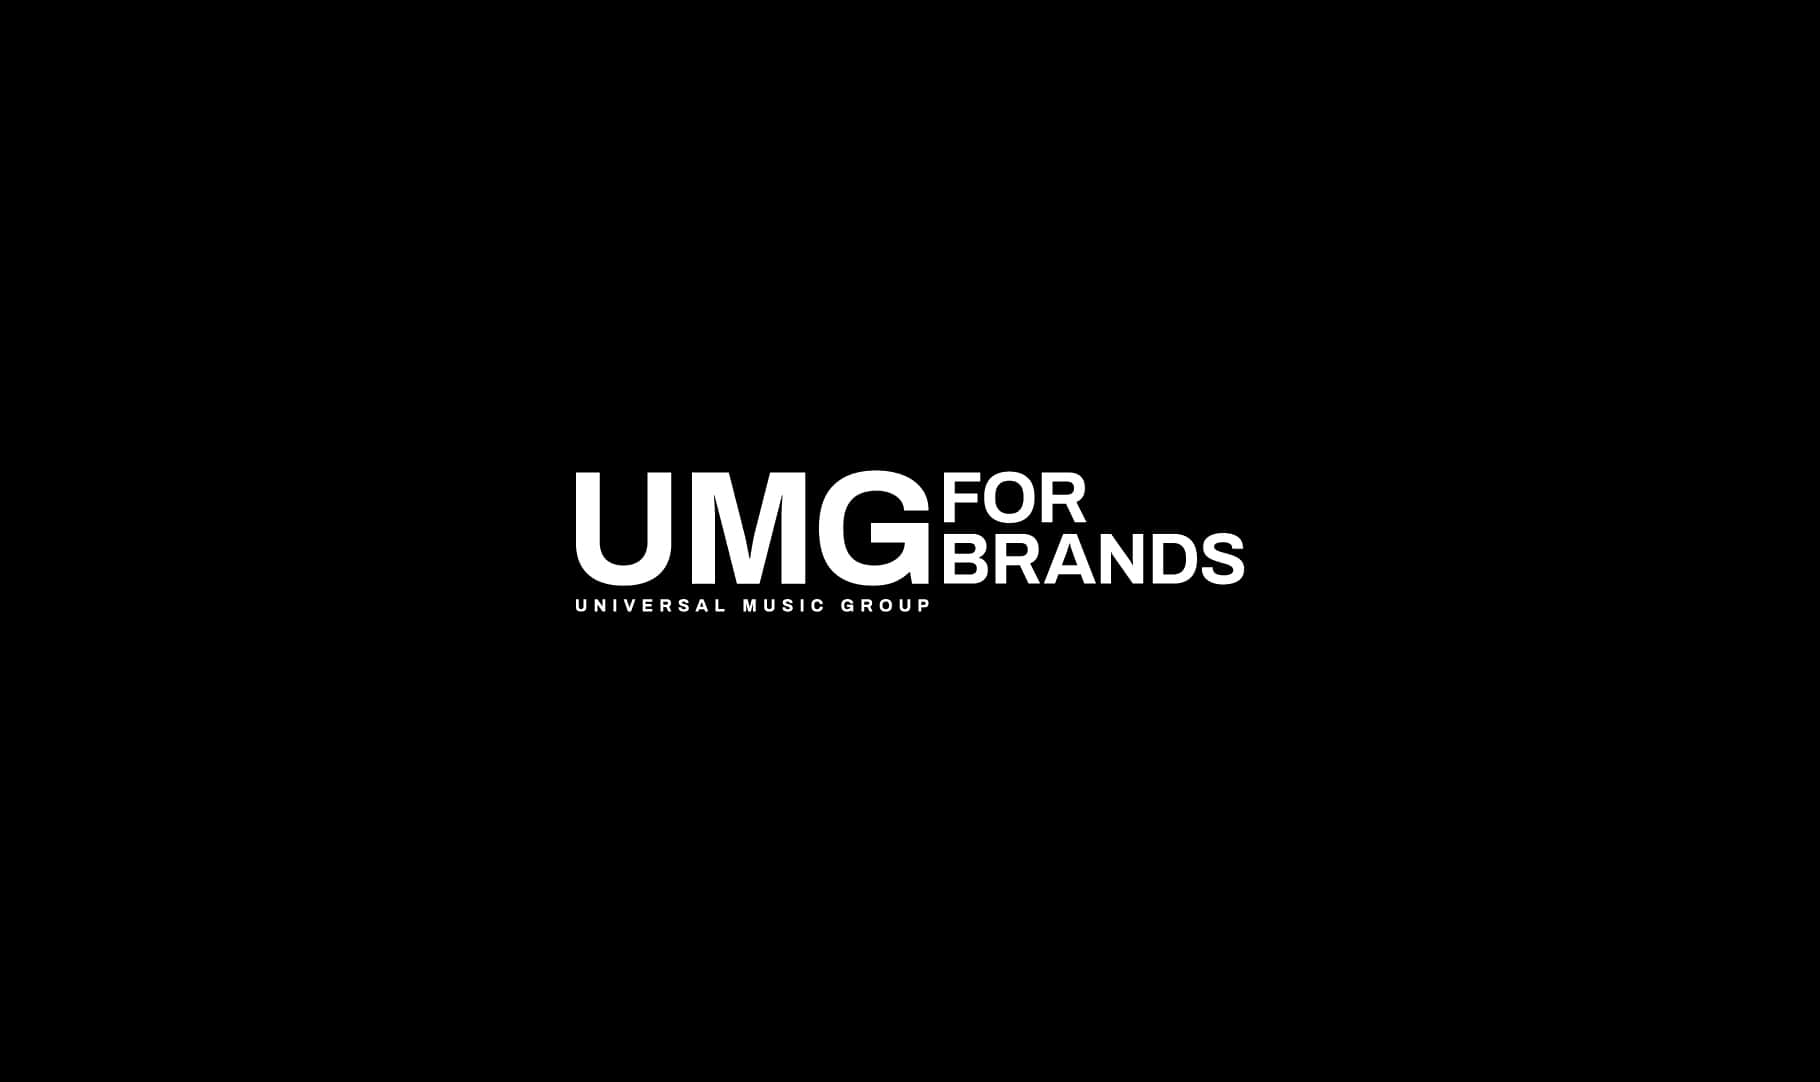 universal music group for brands logotype